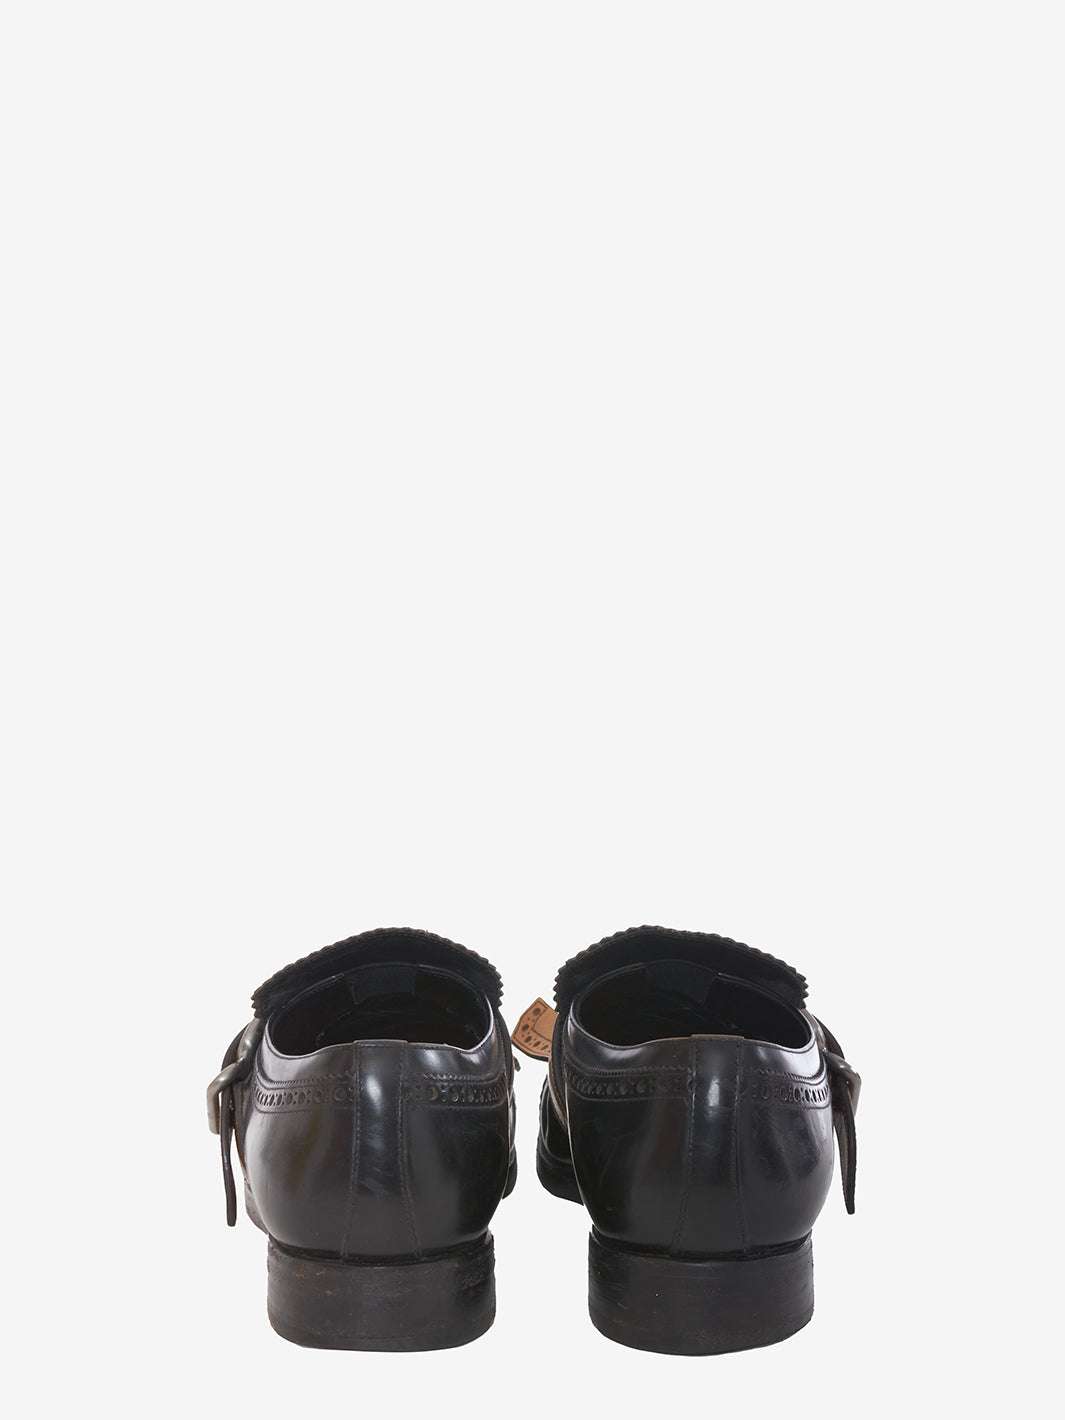 Prada loafer with buckle